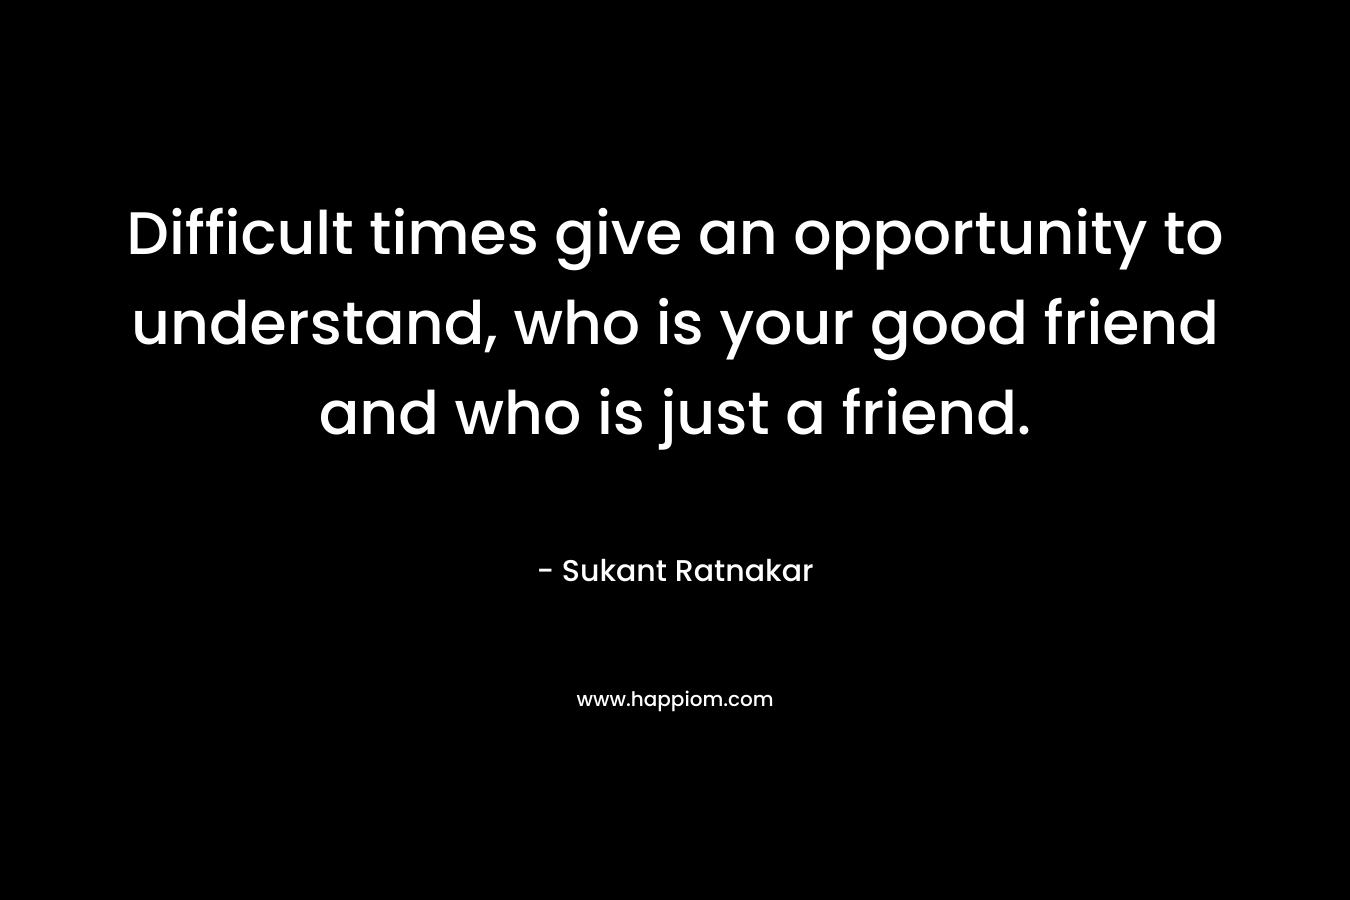 Difficult times give an opportunity to understand, who is your good friend and who is just a friend. – Sukant Ratnakar